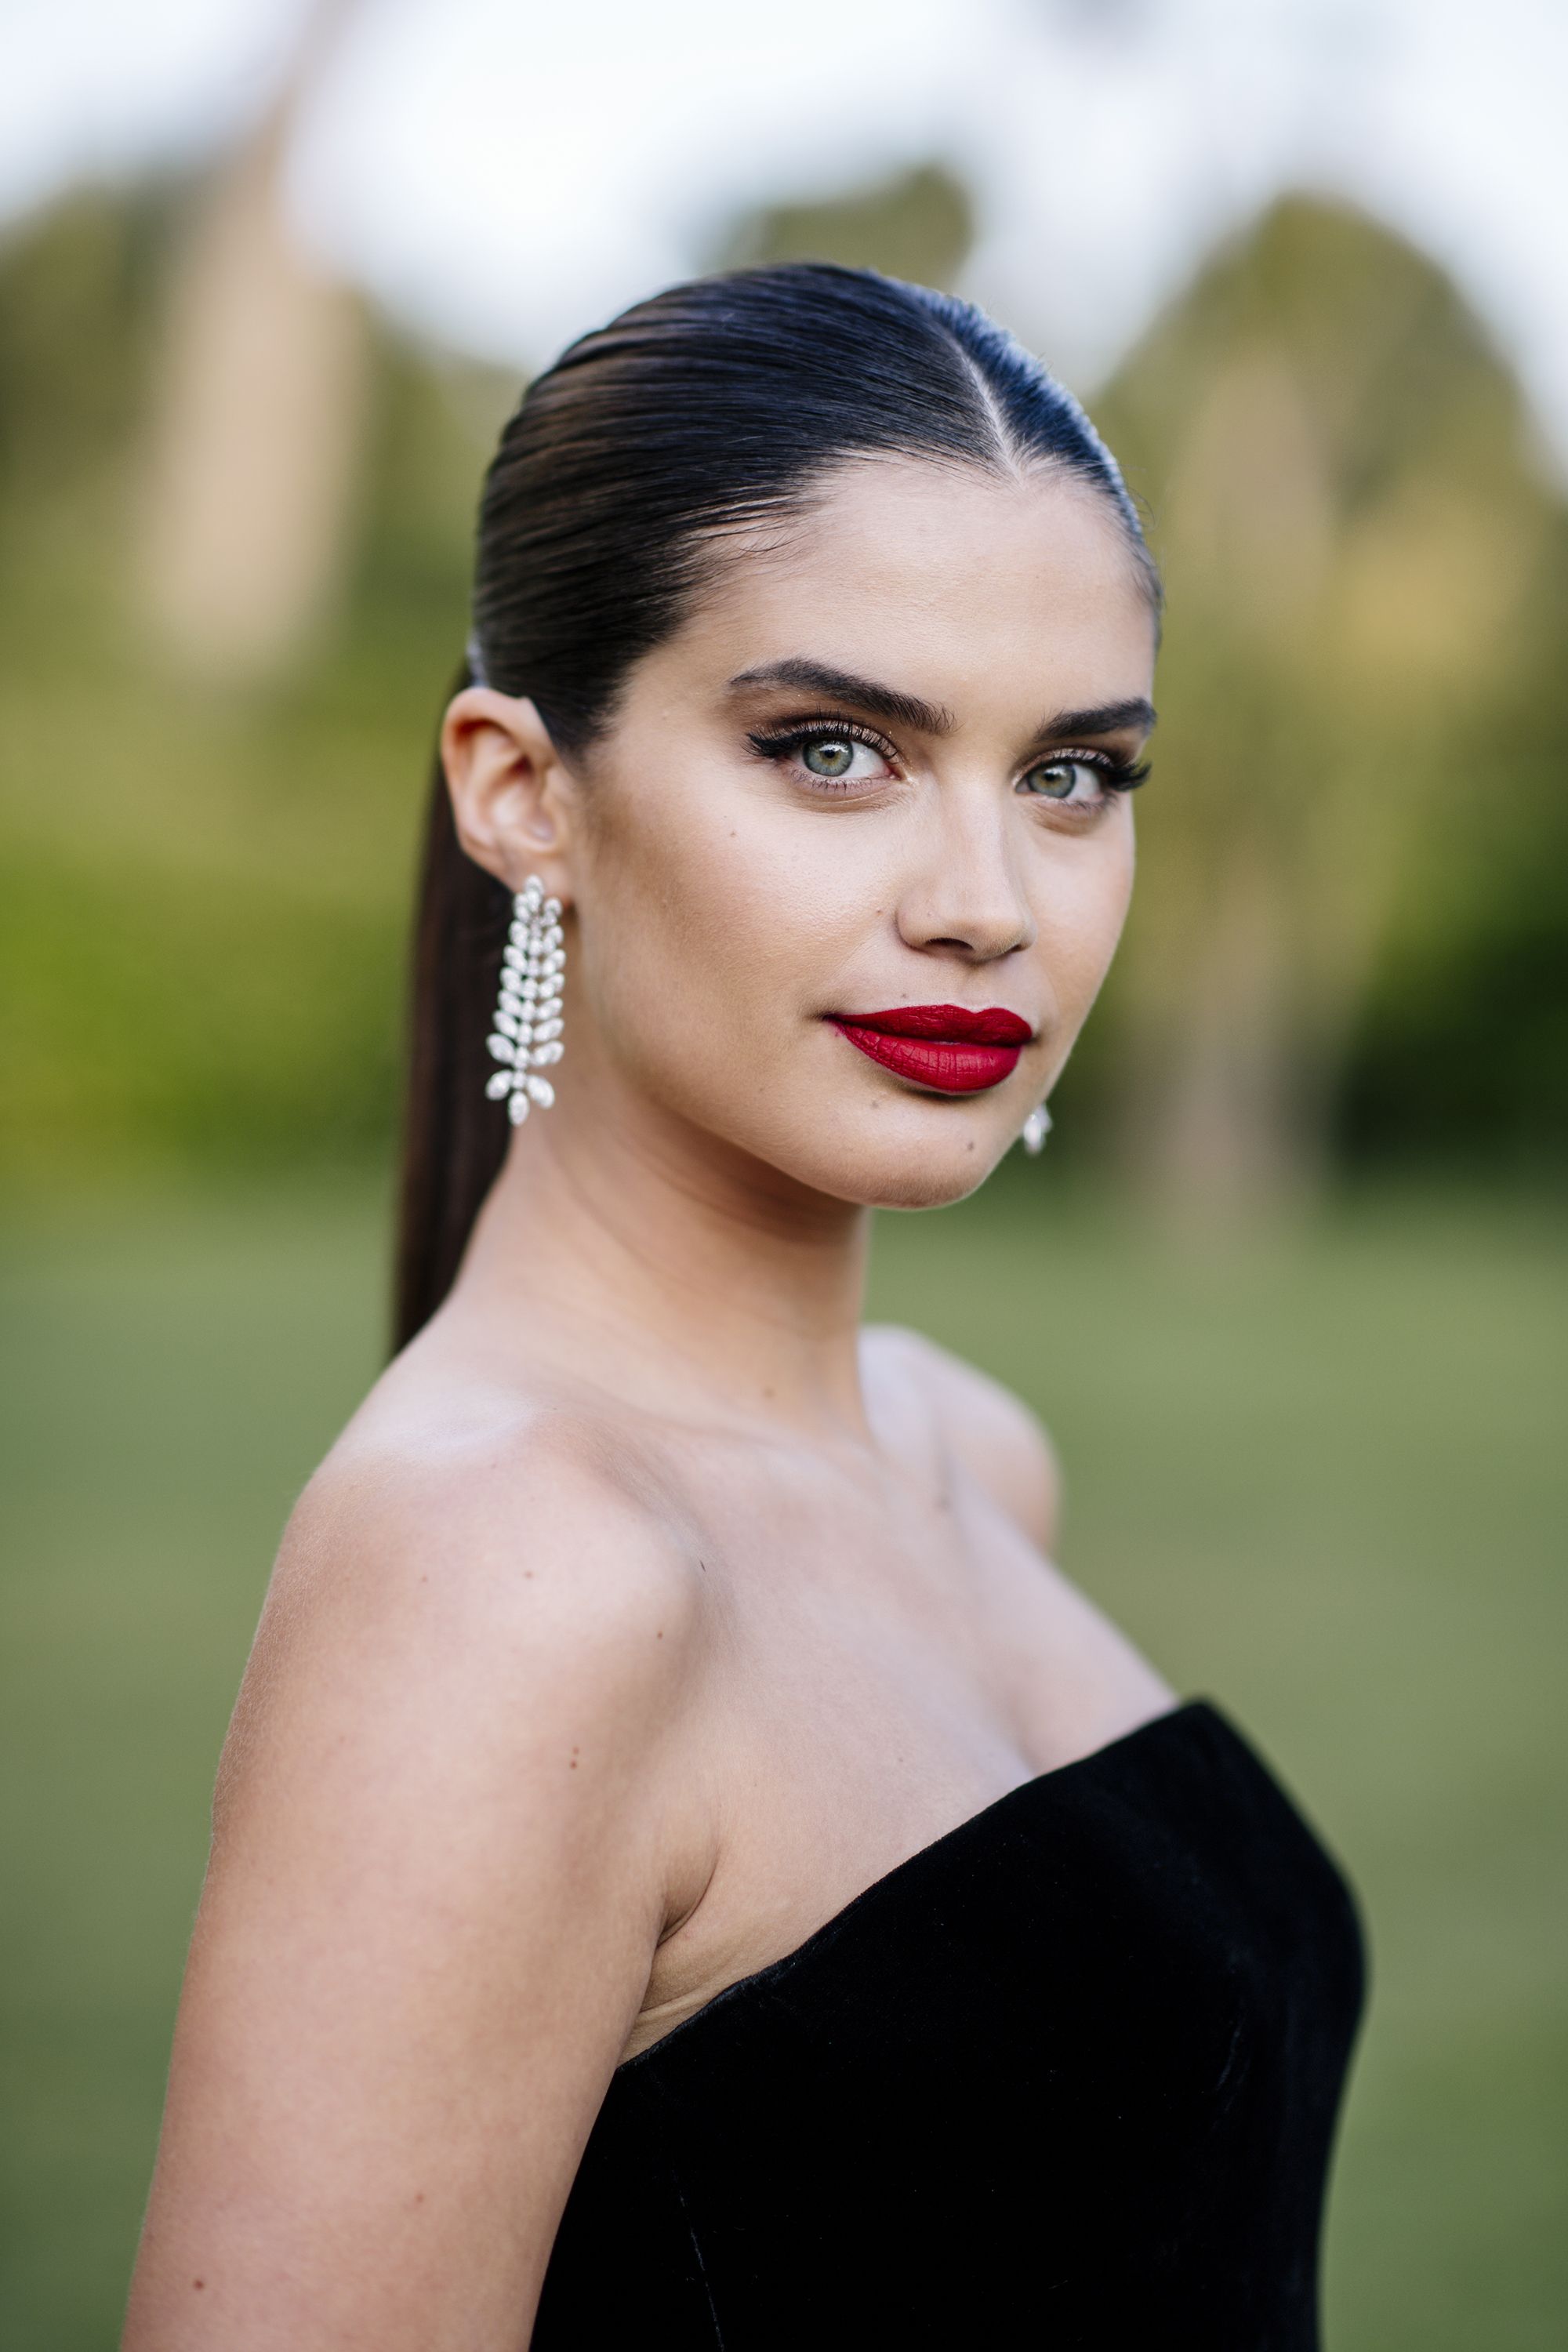 Sara Sampaio On Mental Health, Body Insecurities And Her Simple